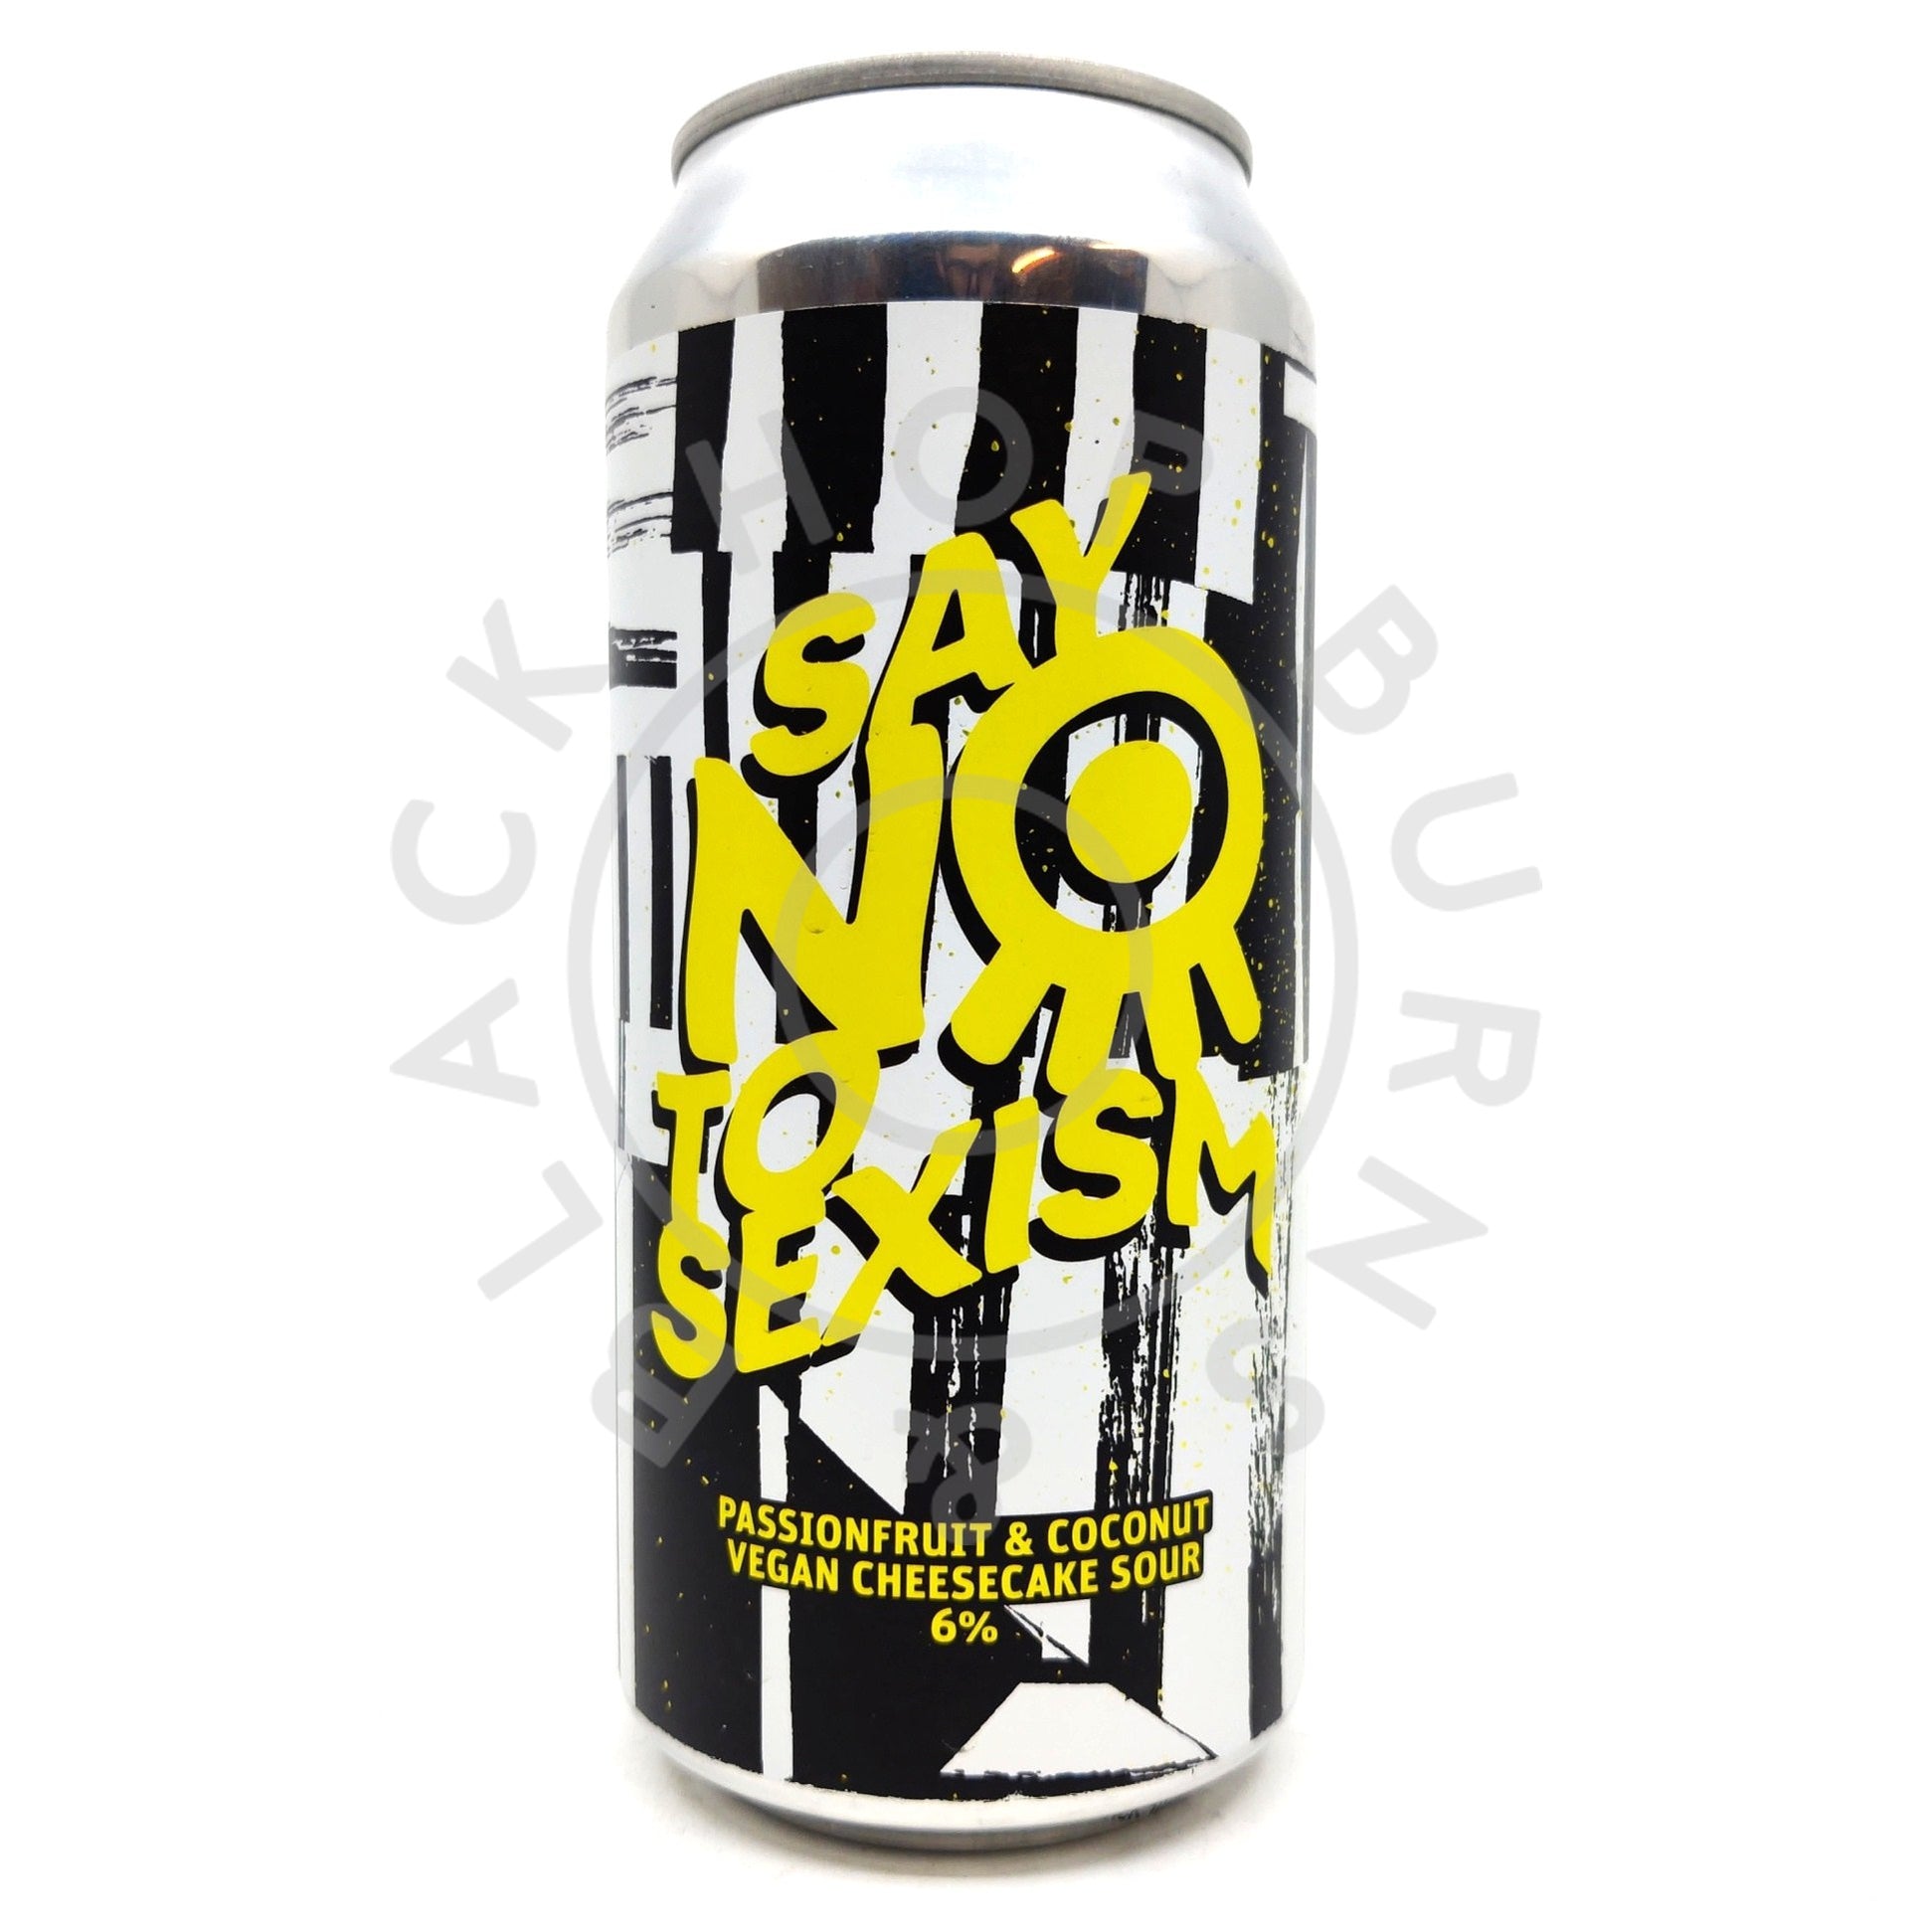 Mothership Say No To Sexism Passion Fruit & Coconut Cheesecake Sour 6% (440ml can)-Hop Burns & Black